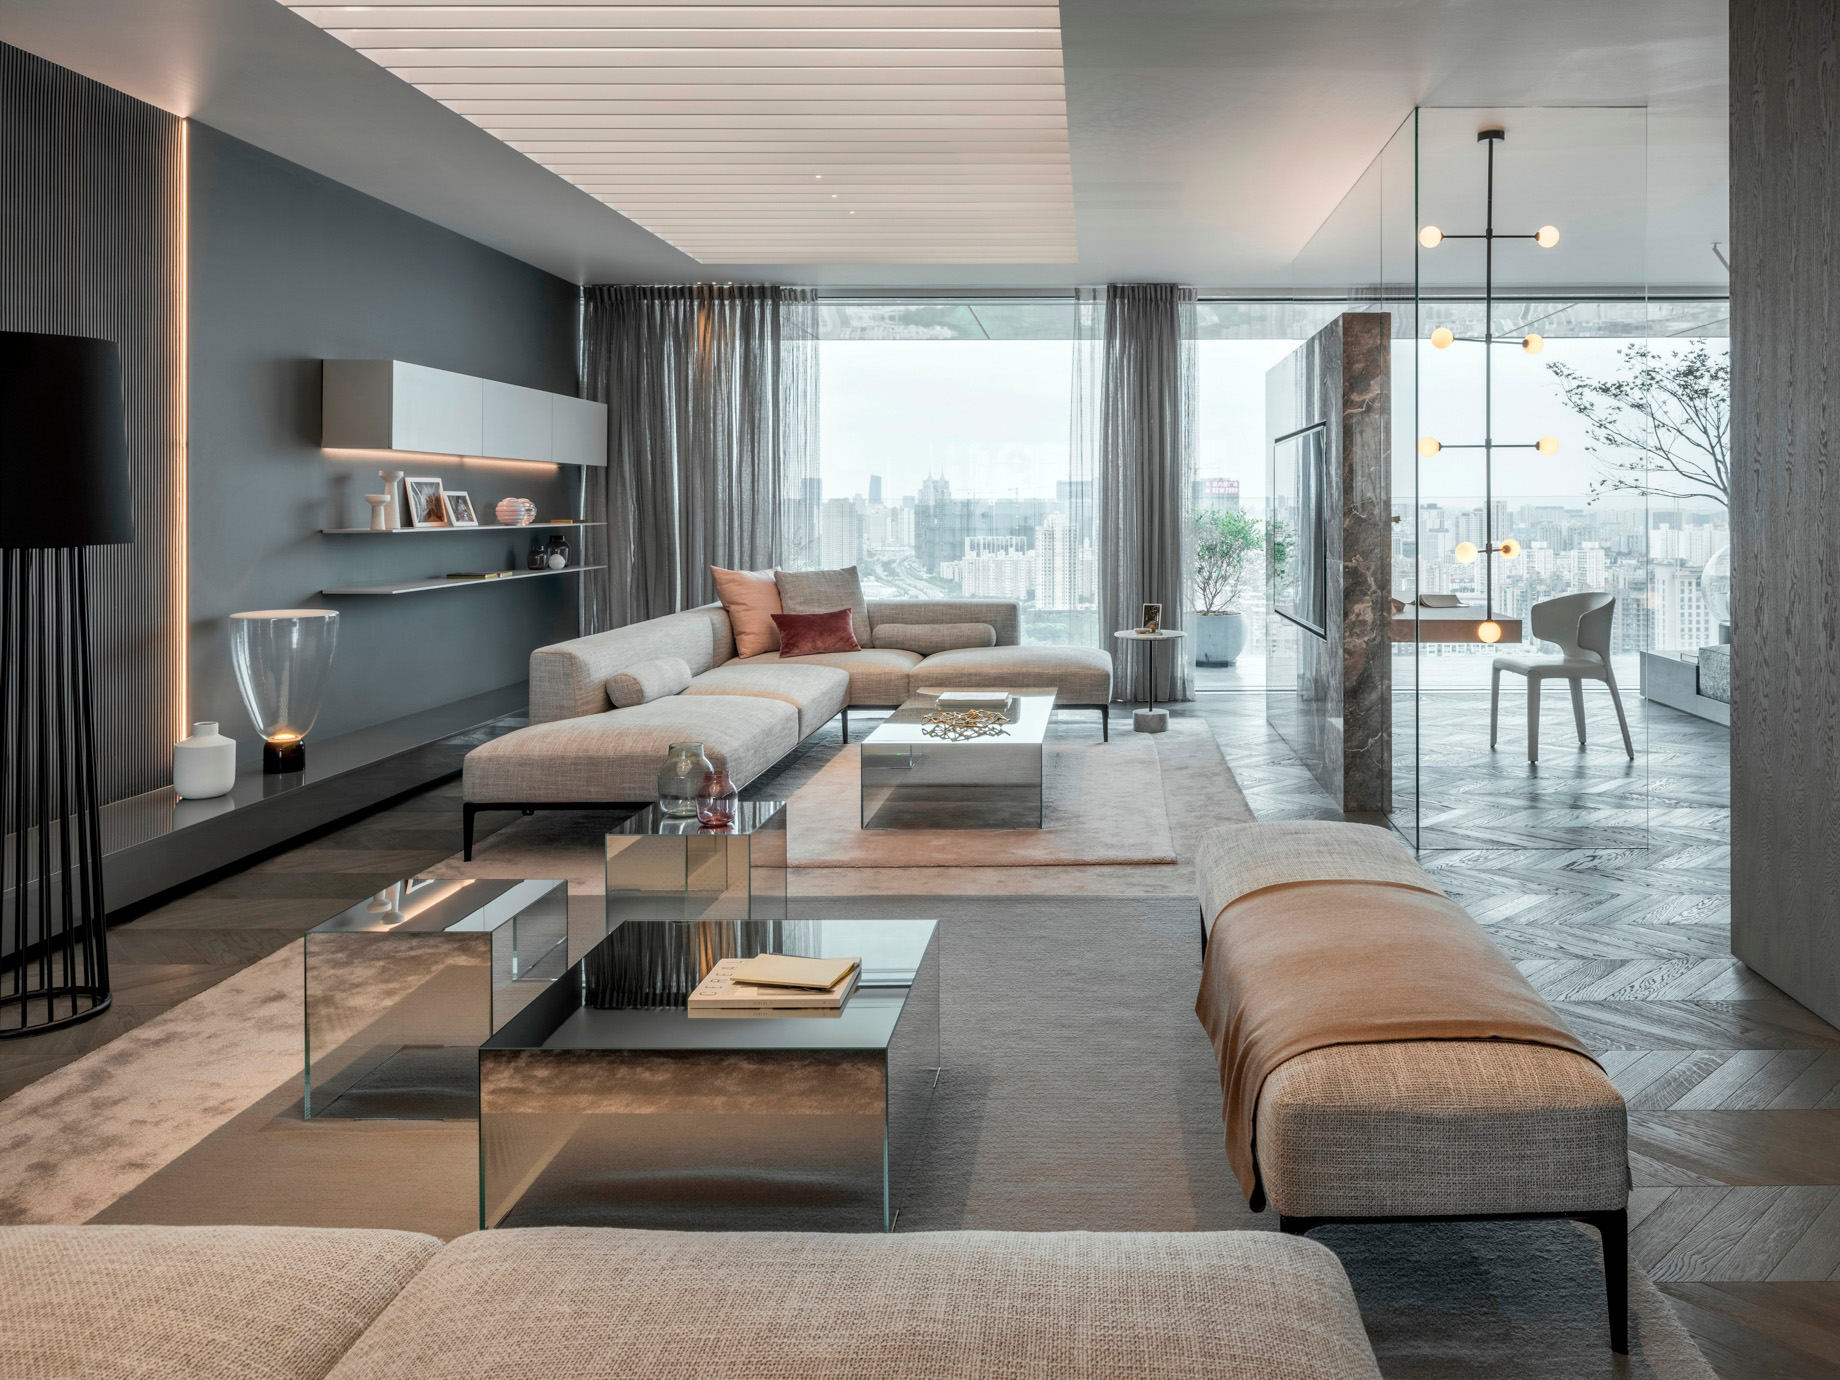 Shades of Grey Apartment Interior Design Shanghai, China – Ippolito Fleitz Group – Living Room Floor to Ceiling Window View